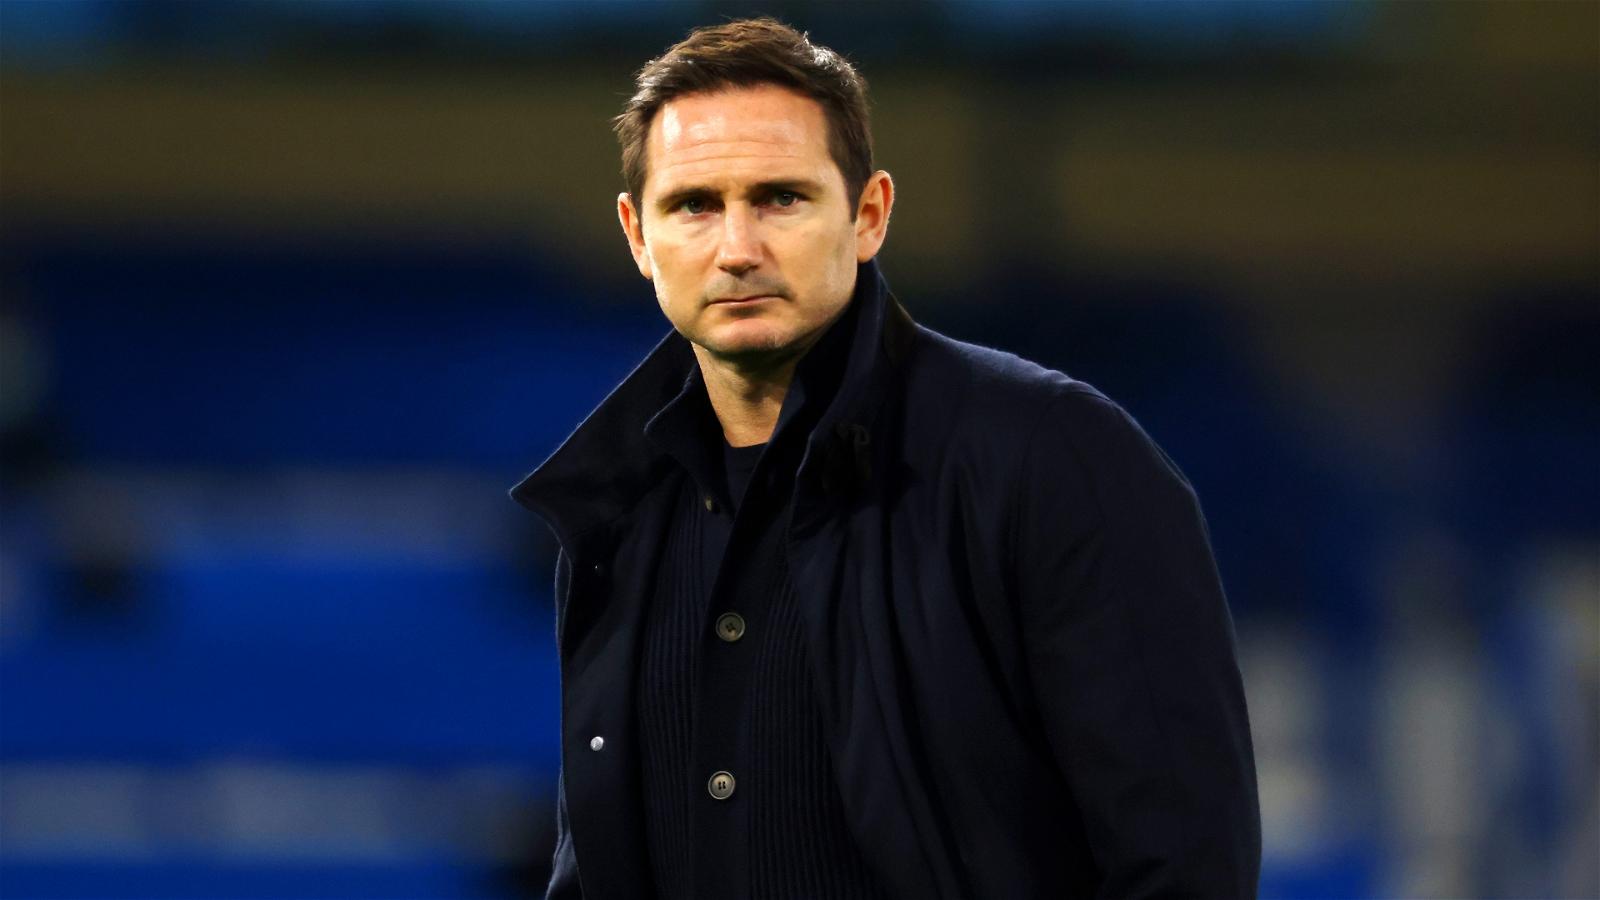 Lampard to be named new Everton coach